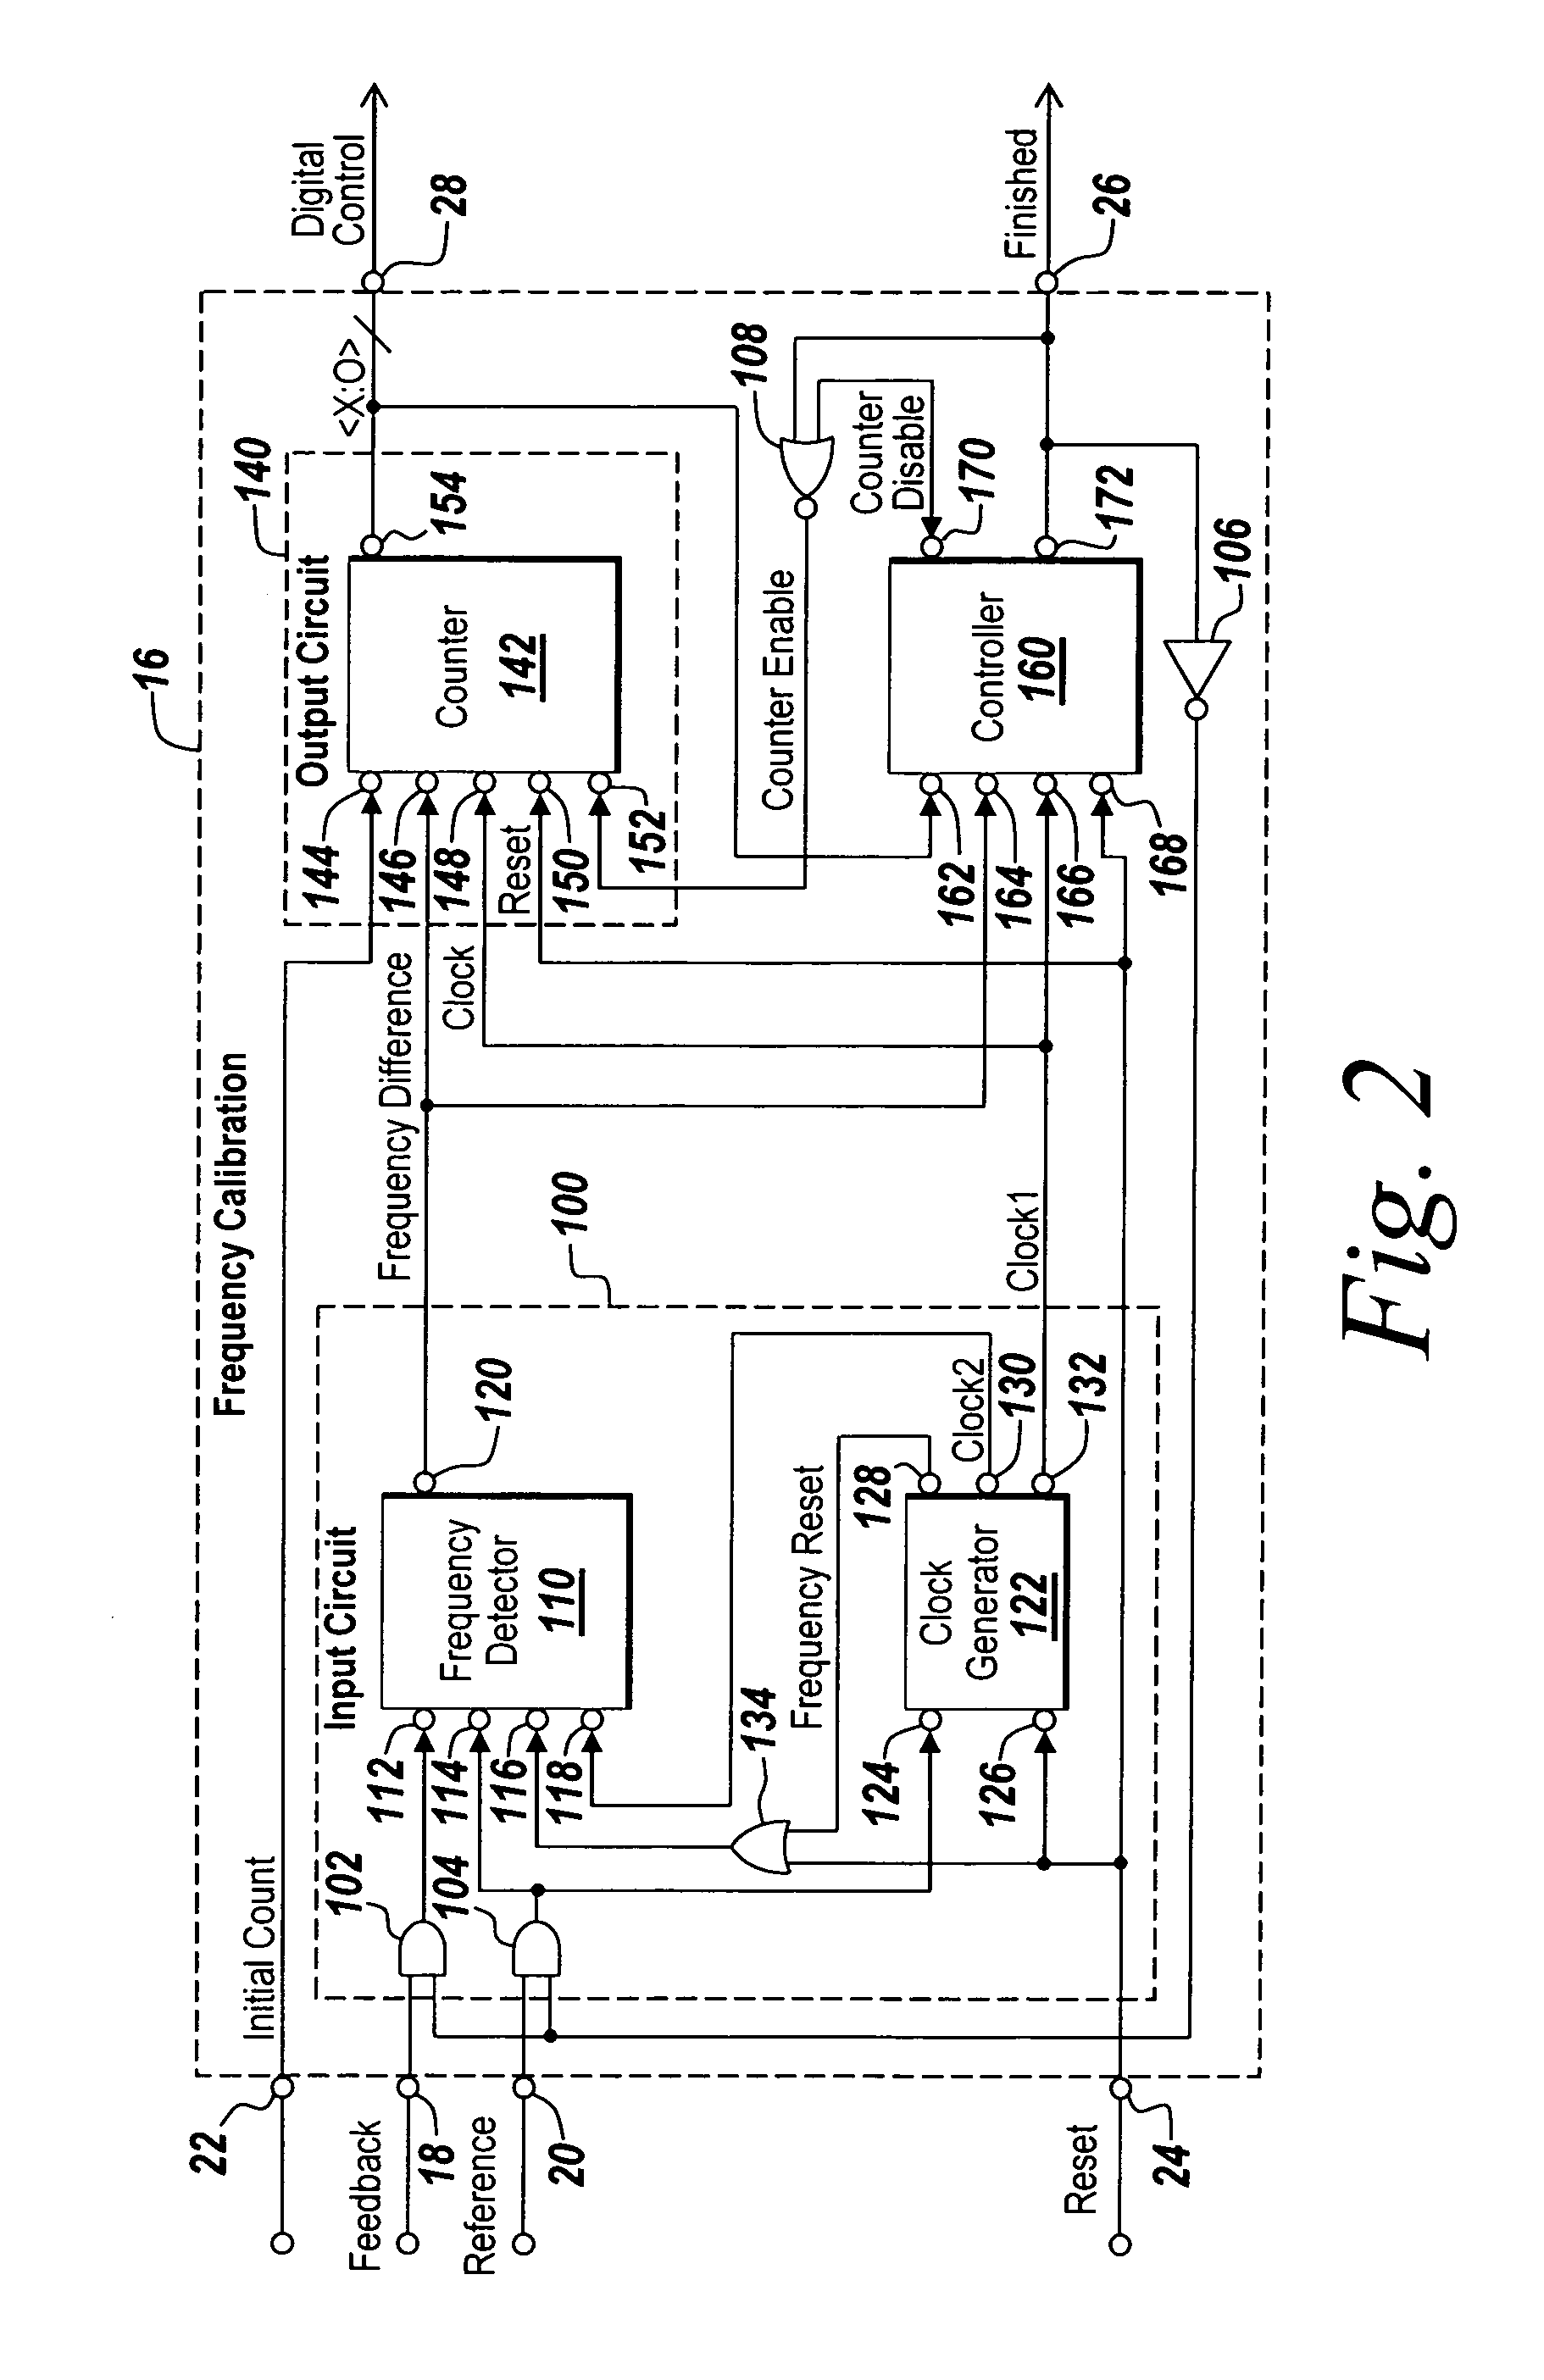 Method and apparatus to center the frequency of a voltage-controlled oscillator